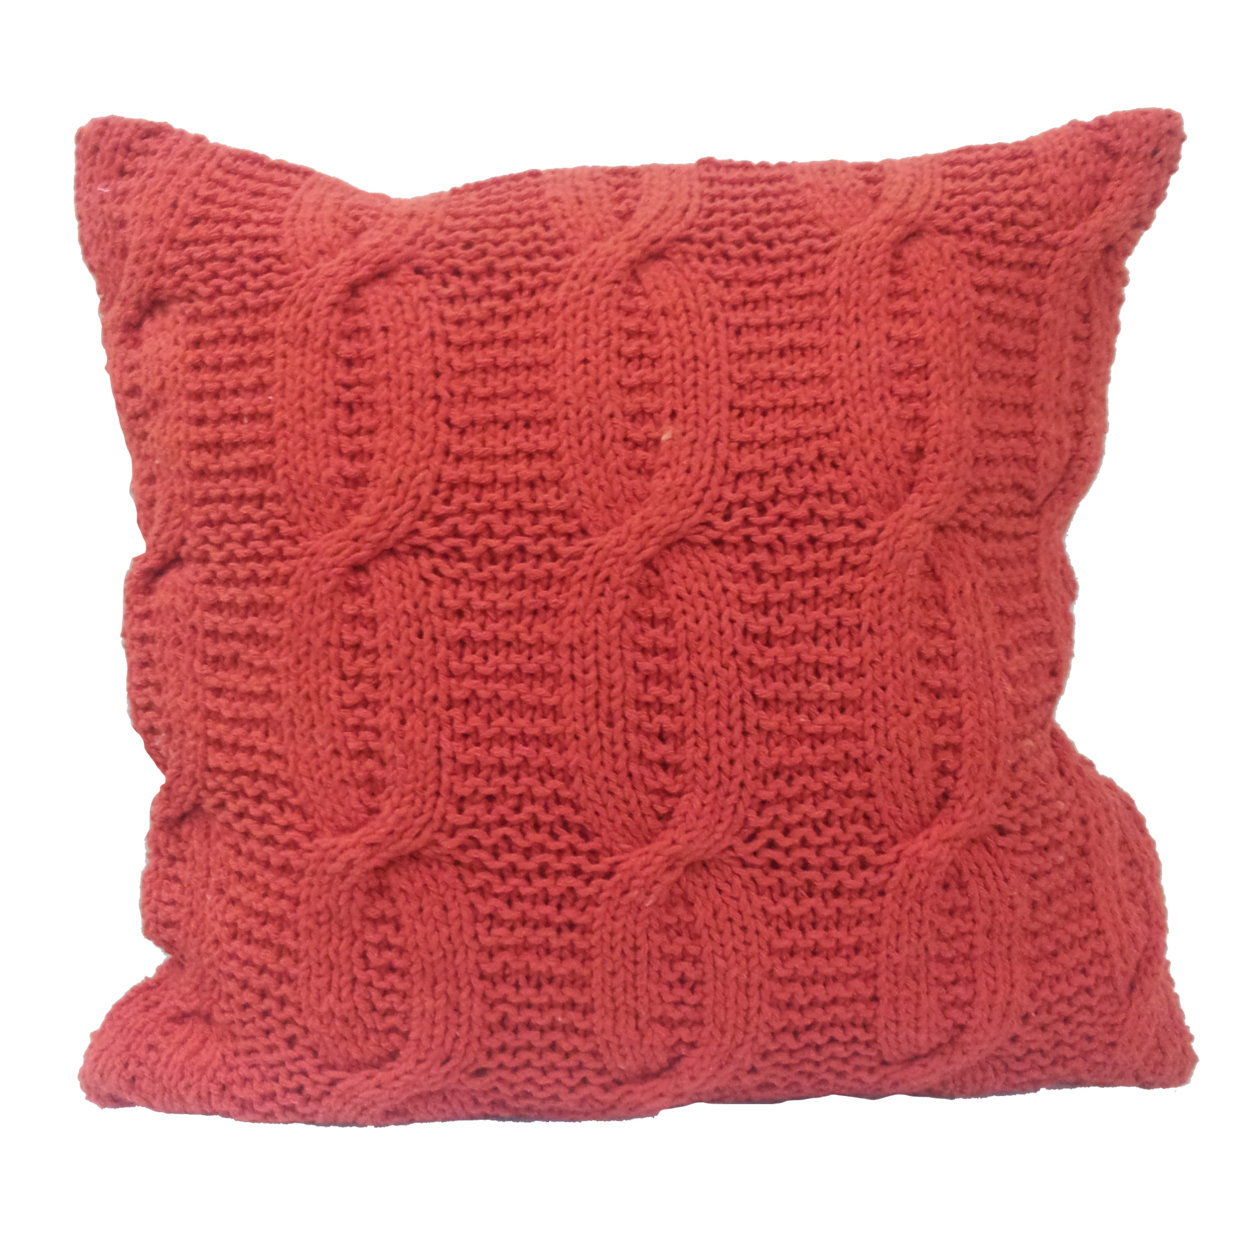 18 X 18 Inch Cotton Cable Knit Pillow With Twisted Details, Set Of 2, Orange- Saltoro Sherpi